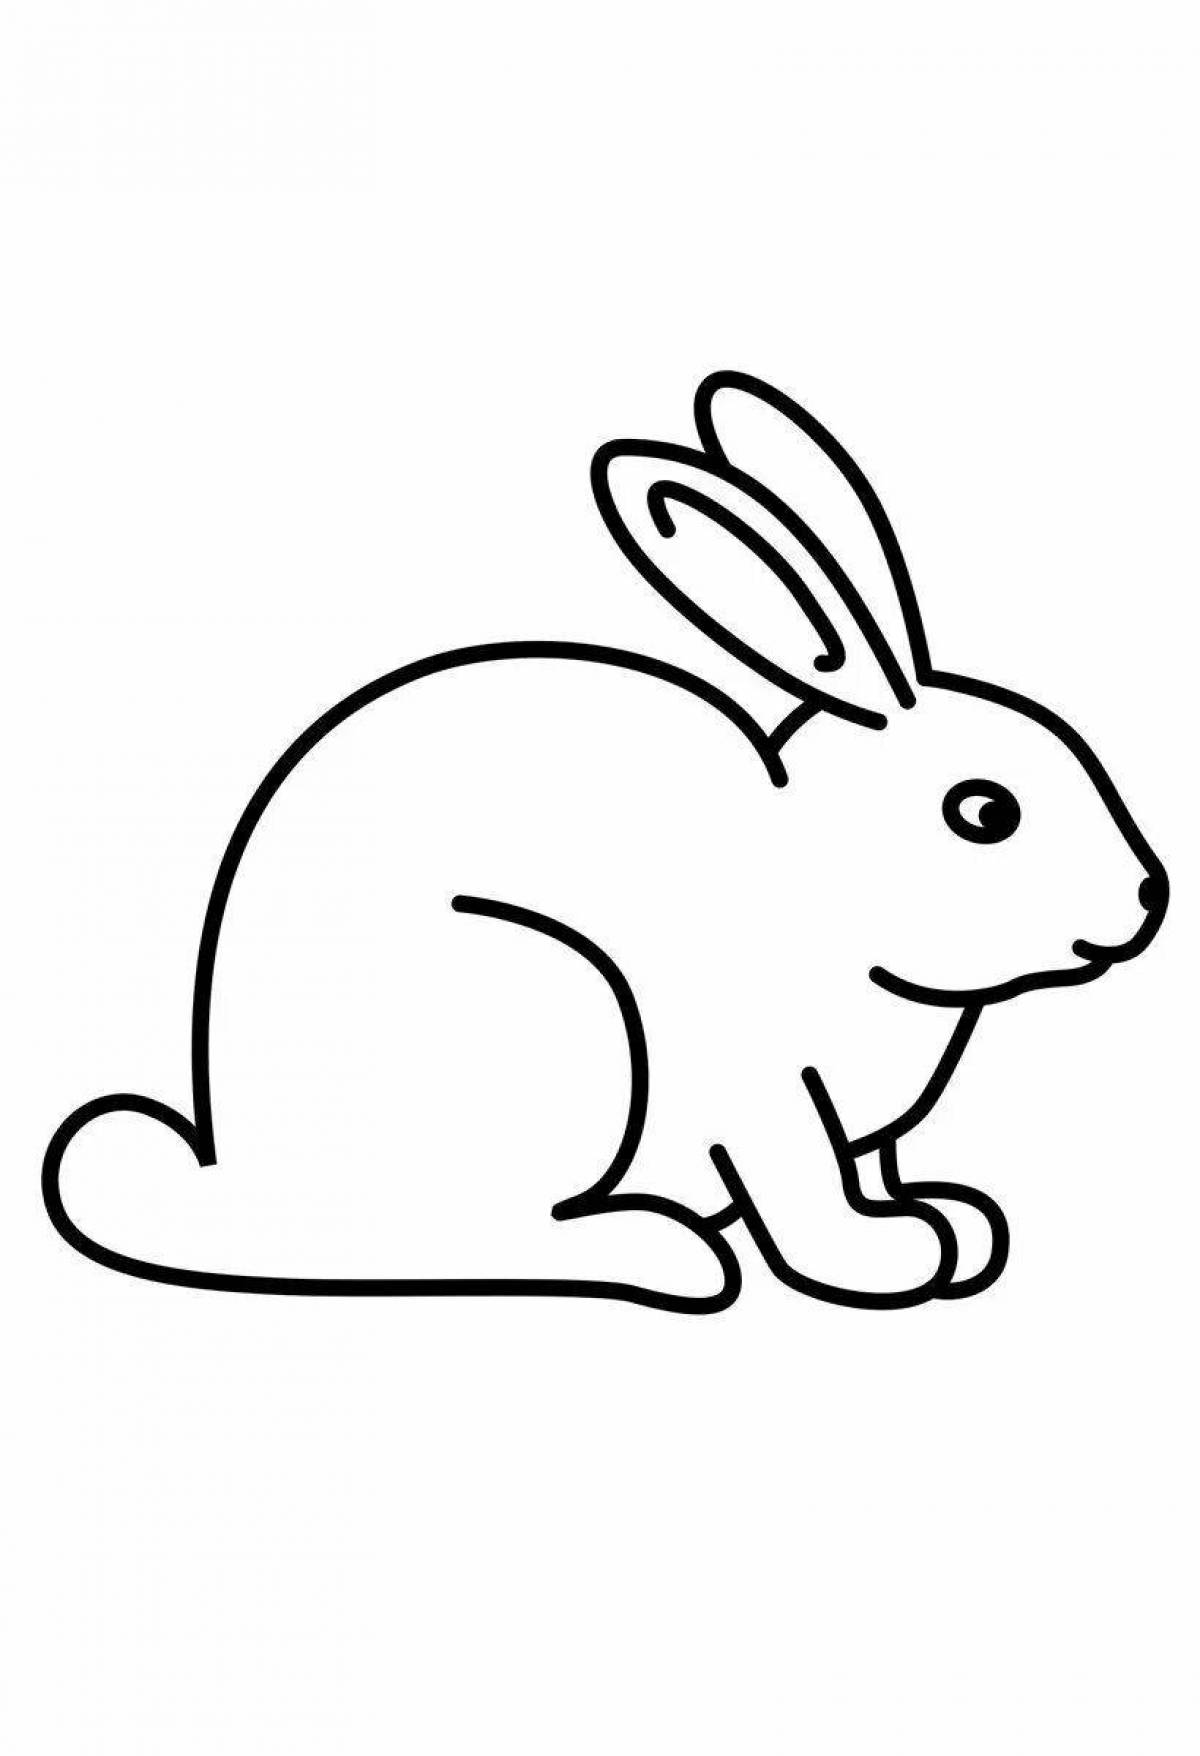 Fluffy coloring page bunny drawing